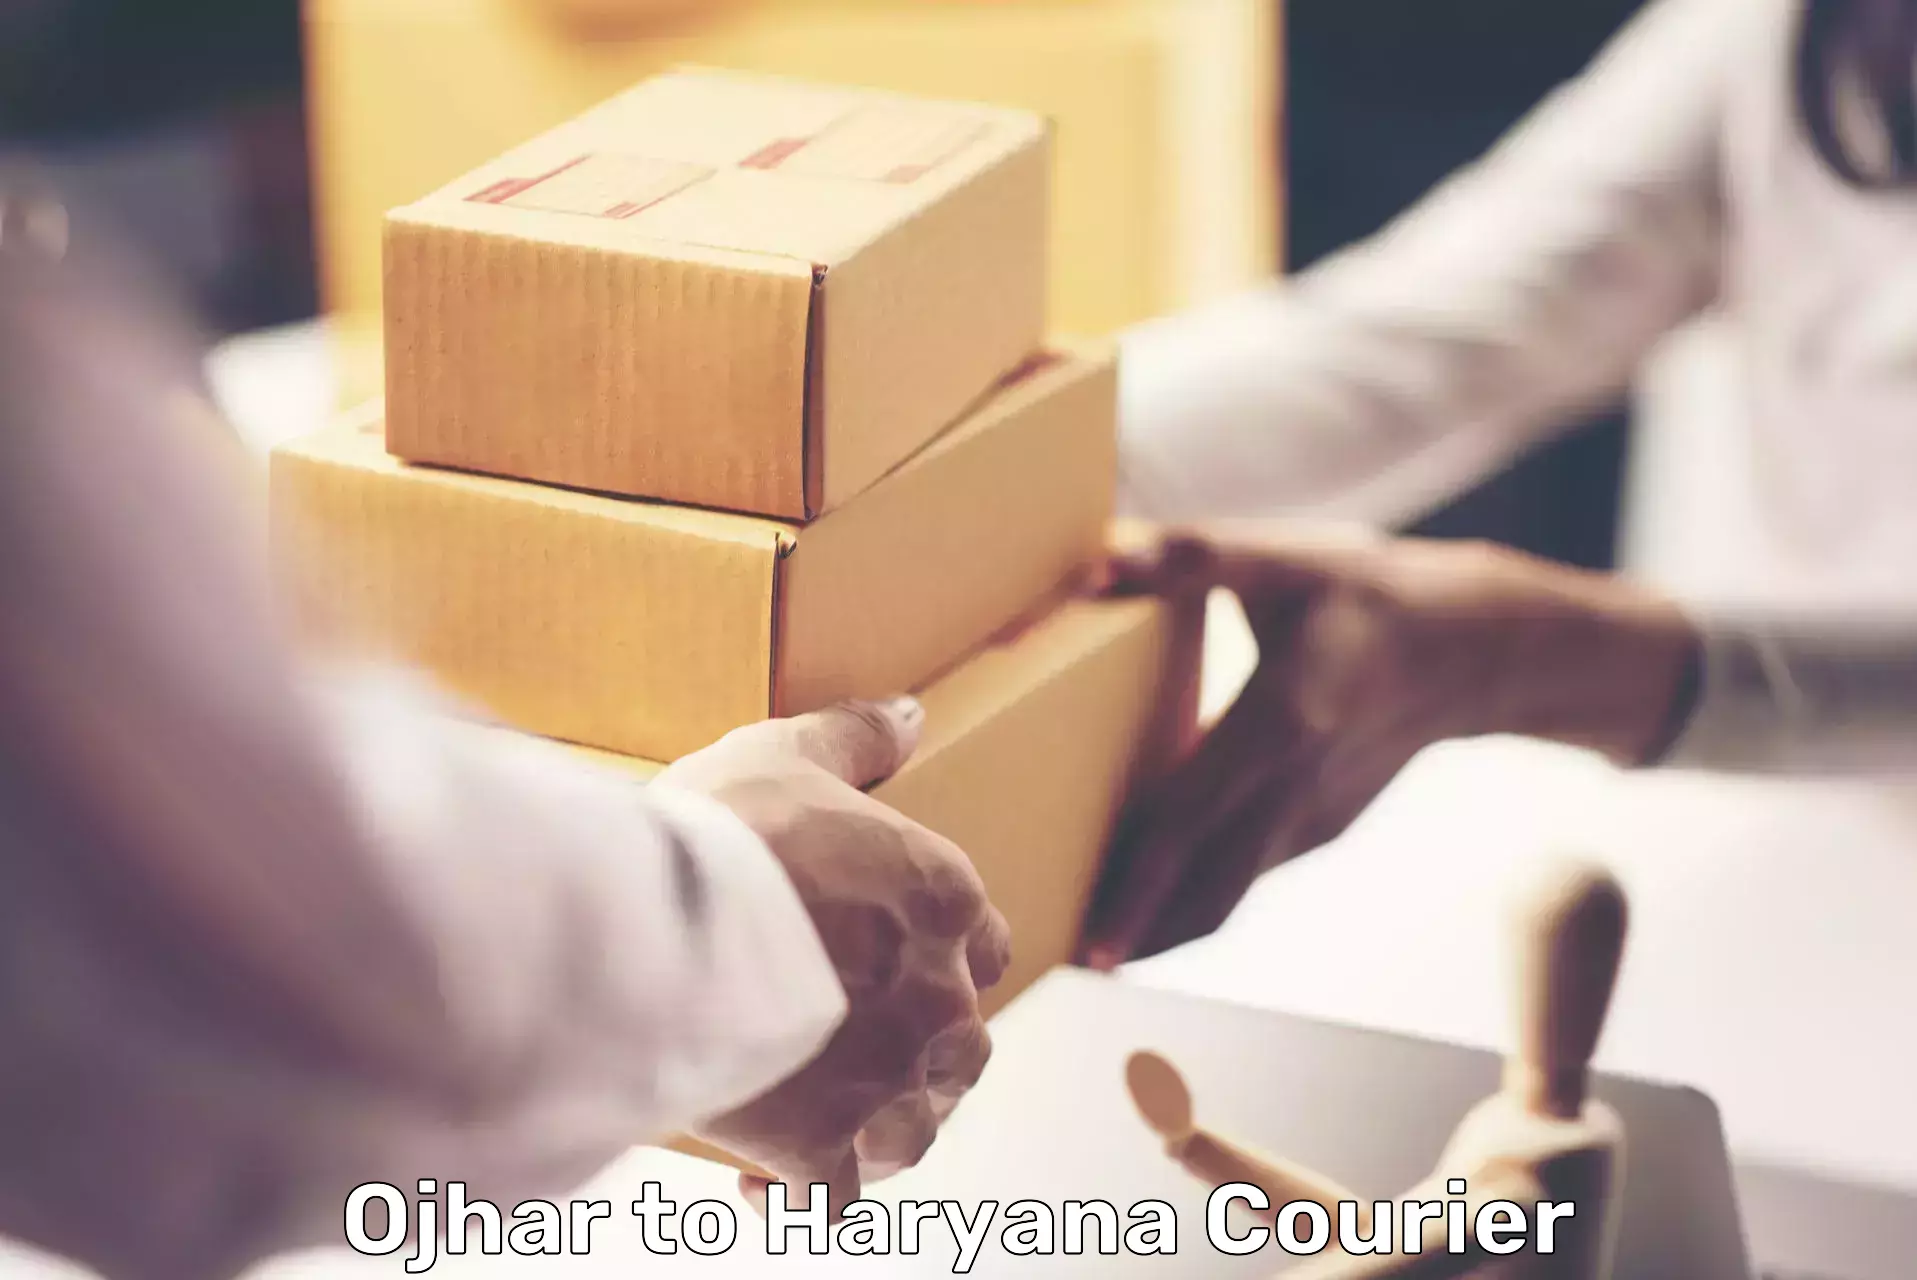 Easy access courier services Ojhar to Odhan